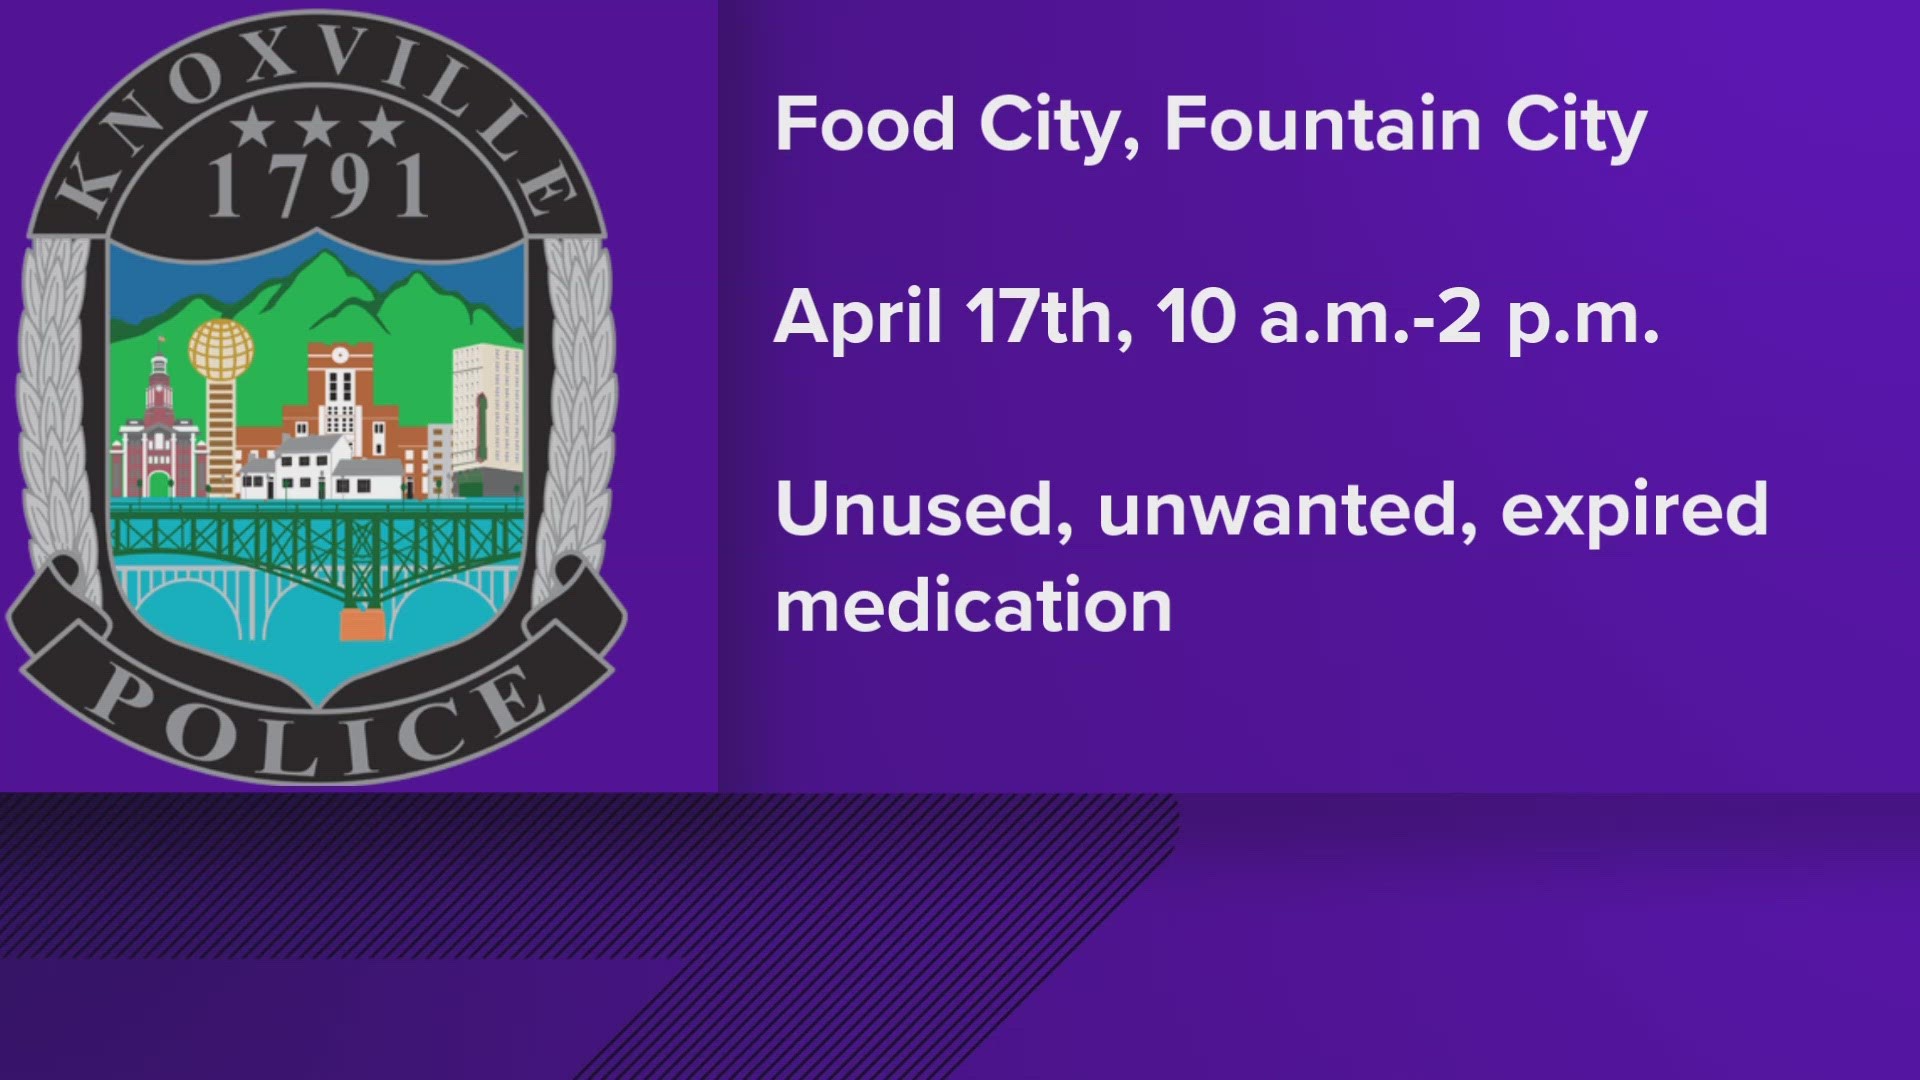 Knoxville Polie and Metro Drug Coalition will host a drug take-back day on April 15 from 10 a.m. until 2 p.m. at the Food City in Fountain City.